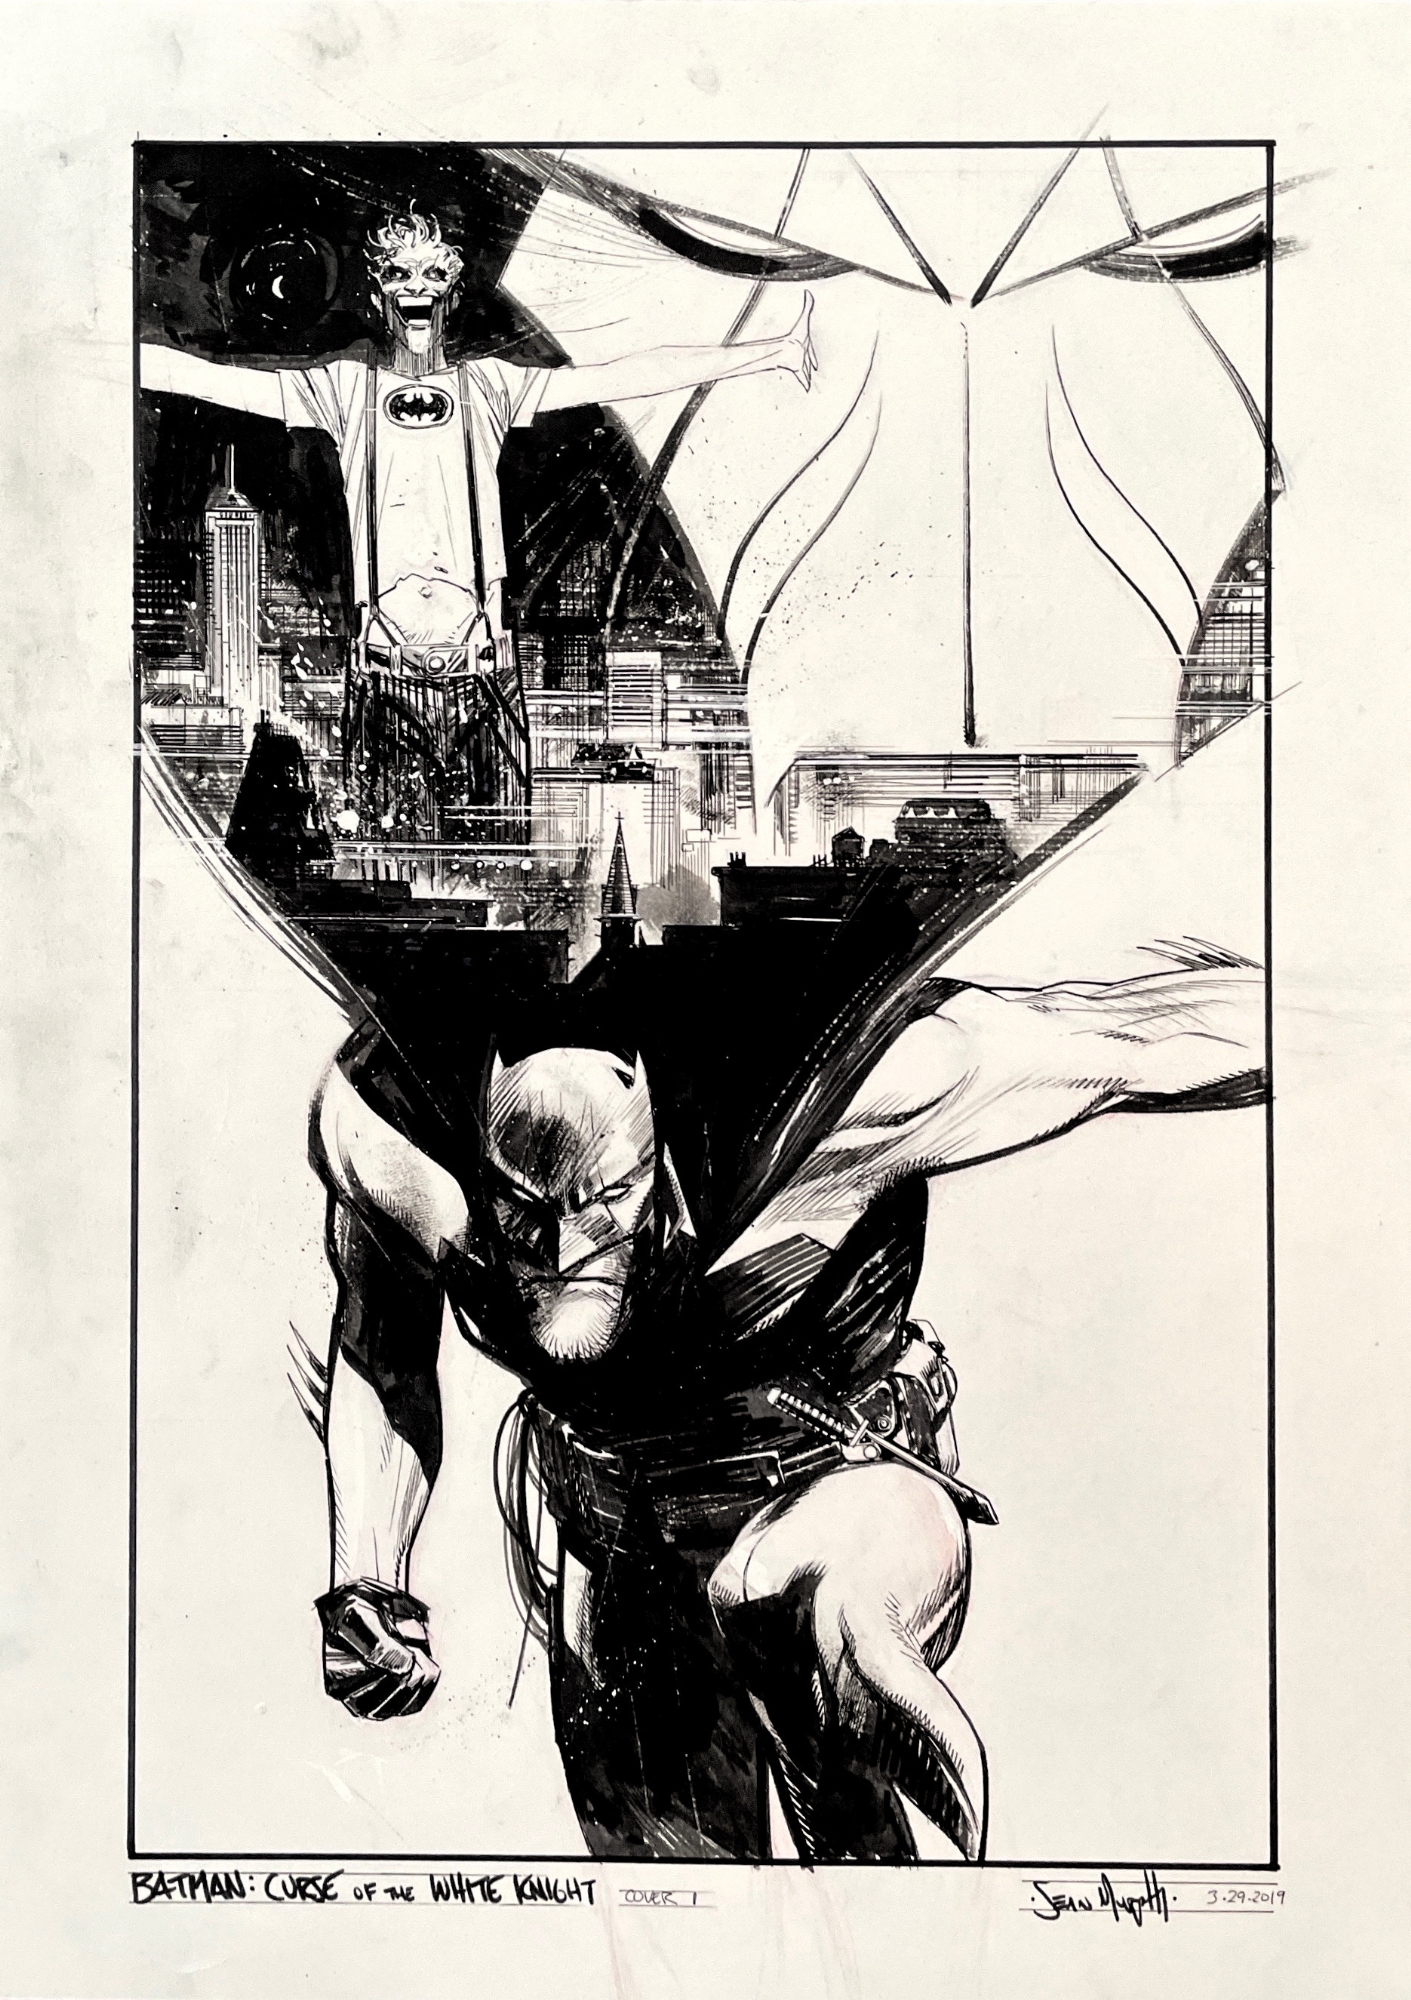 Sean Murphy--Batman: Curse of the White Knight #1 Cover (2020), in